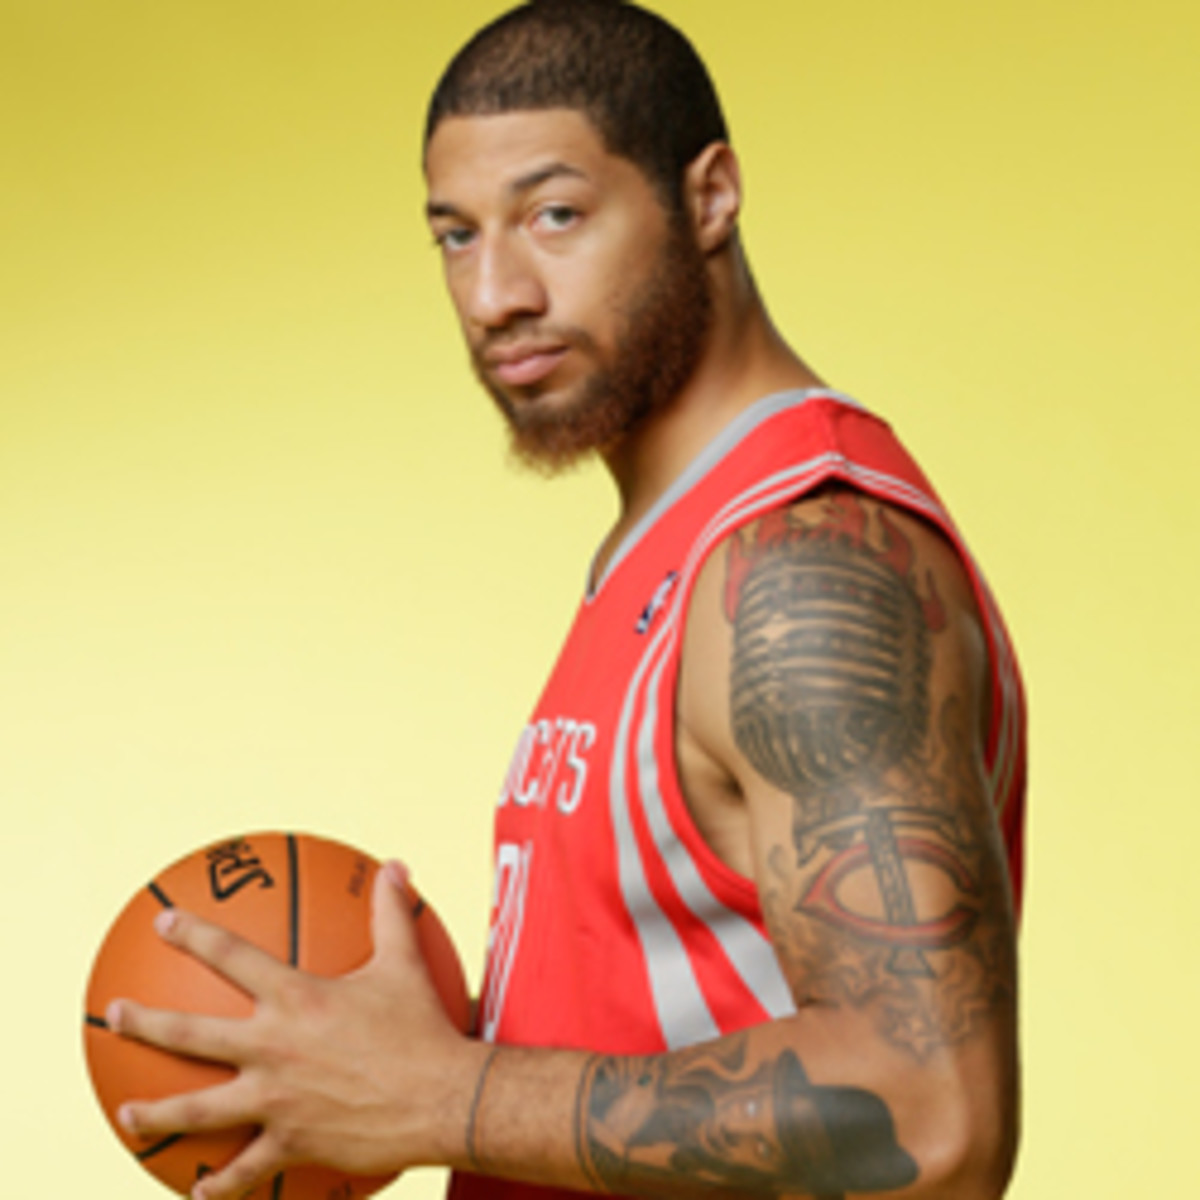 Rockets rookie Royce White suffers from general anxiety disorder. (Steven Freeman/NBAE via Getty Images)